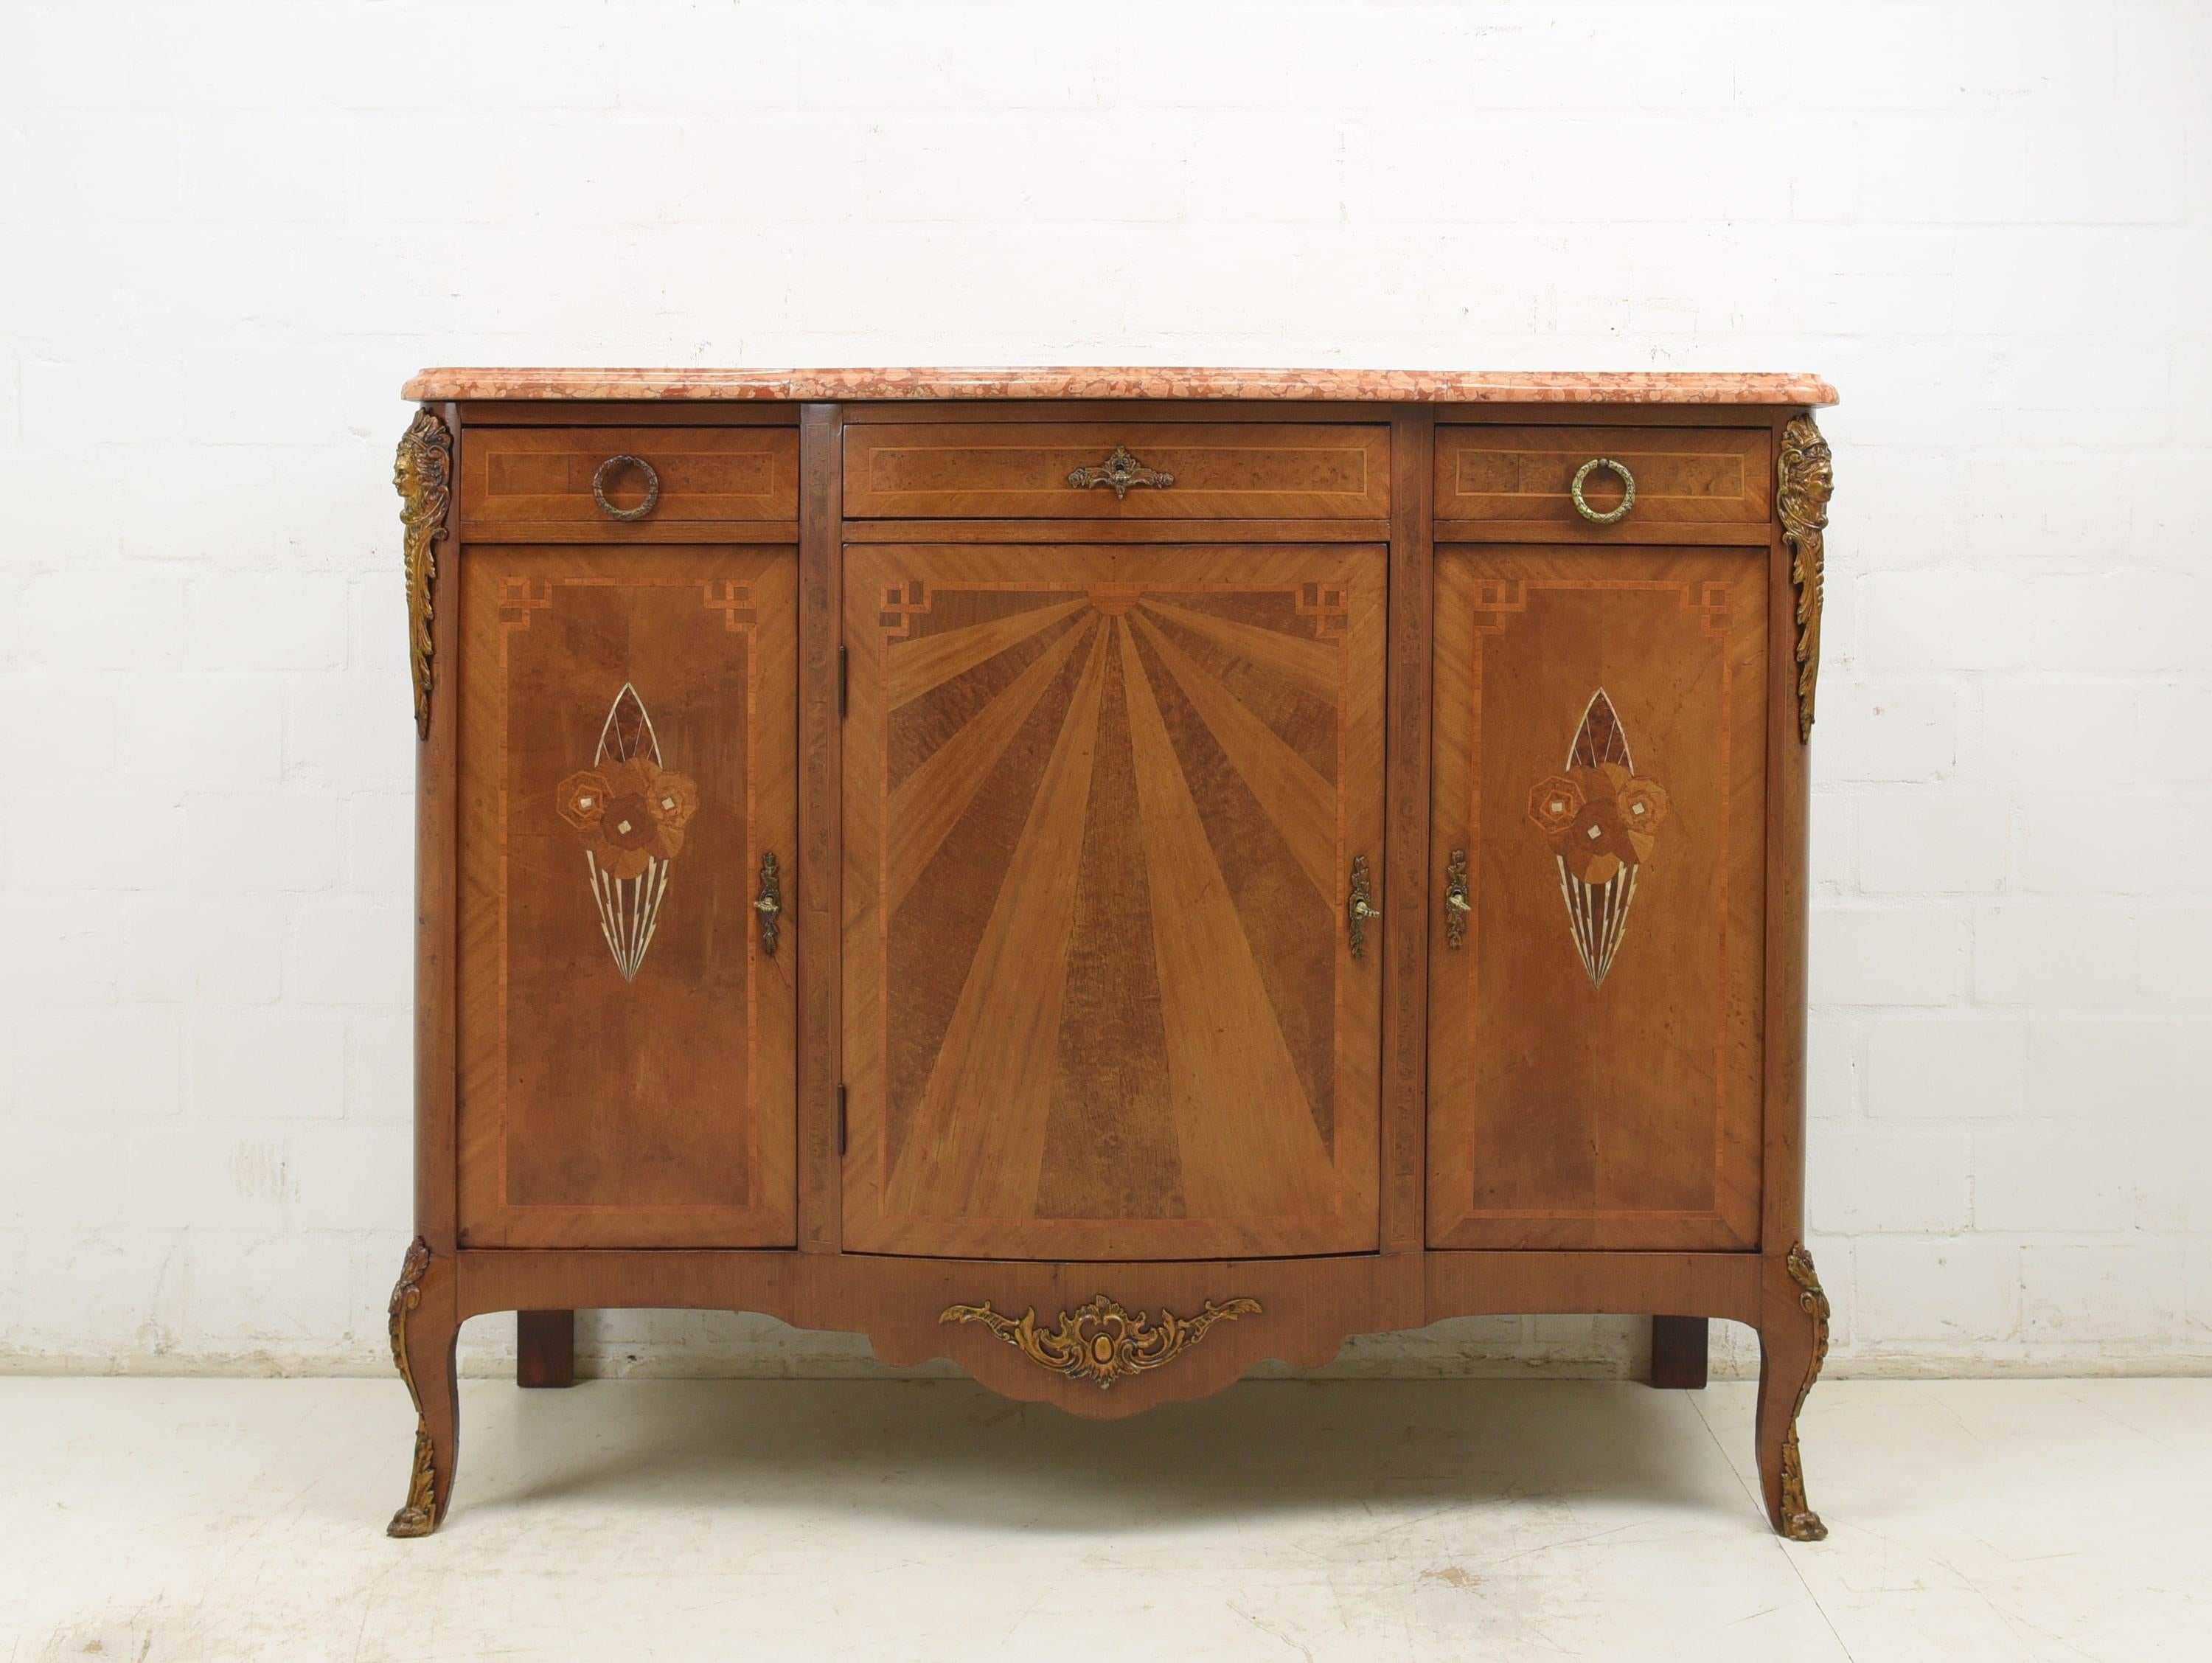 Dresser restored Art Deco circa 1925 mahogany sideboard chest of drawers

Features:
Three-door model with three drawers
Two continuous shelves
Very high quality processing
Drawers pronged
Original high-quality fittings and metal